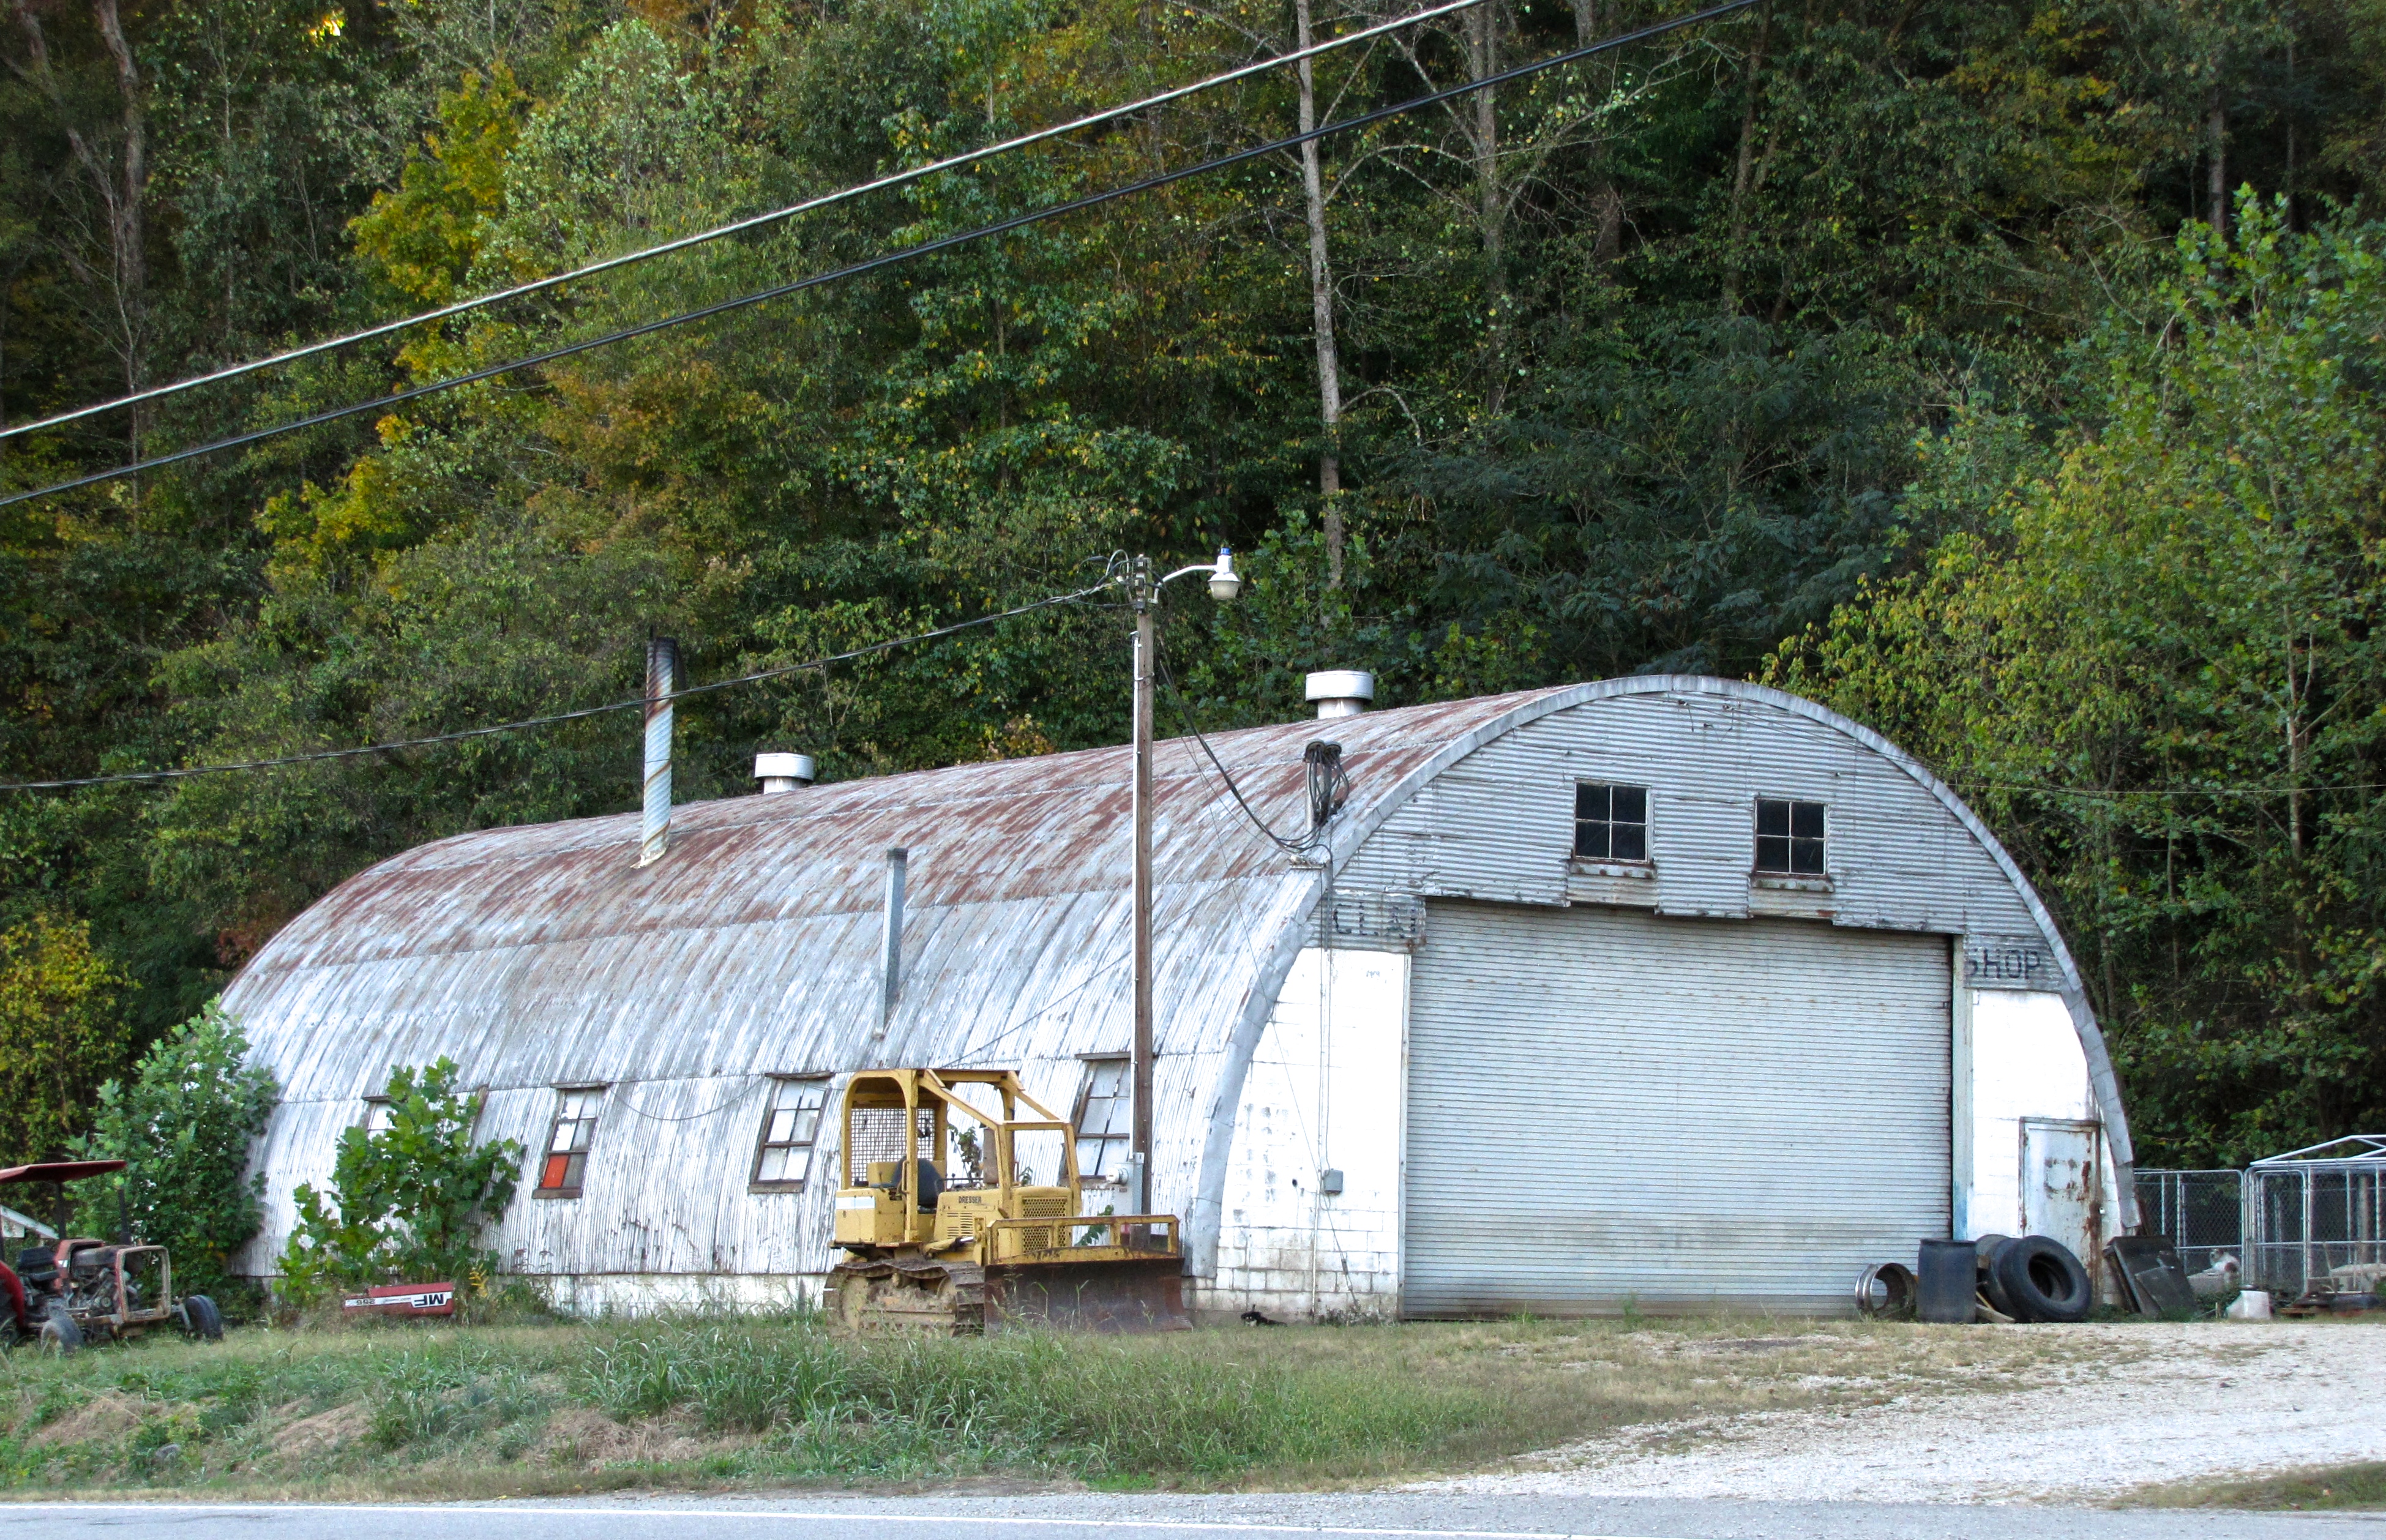 quonset hut in Kingston, NH